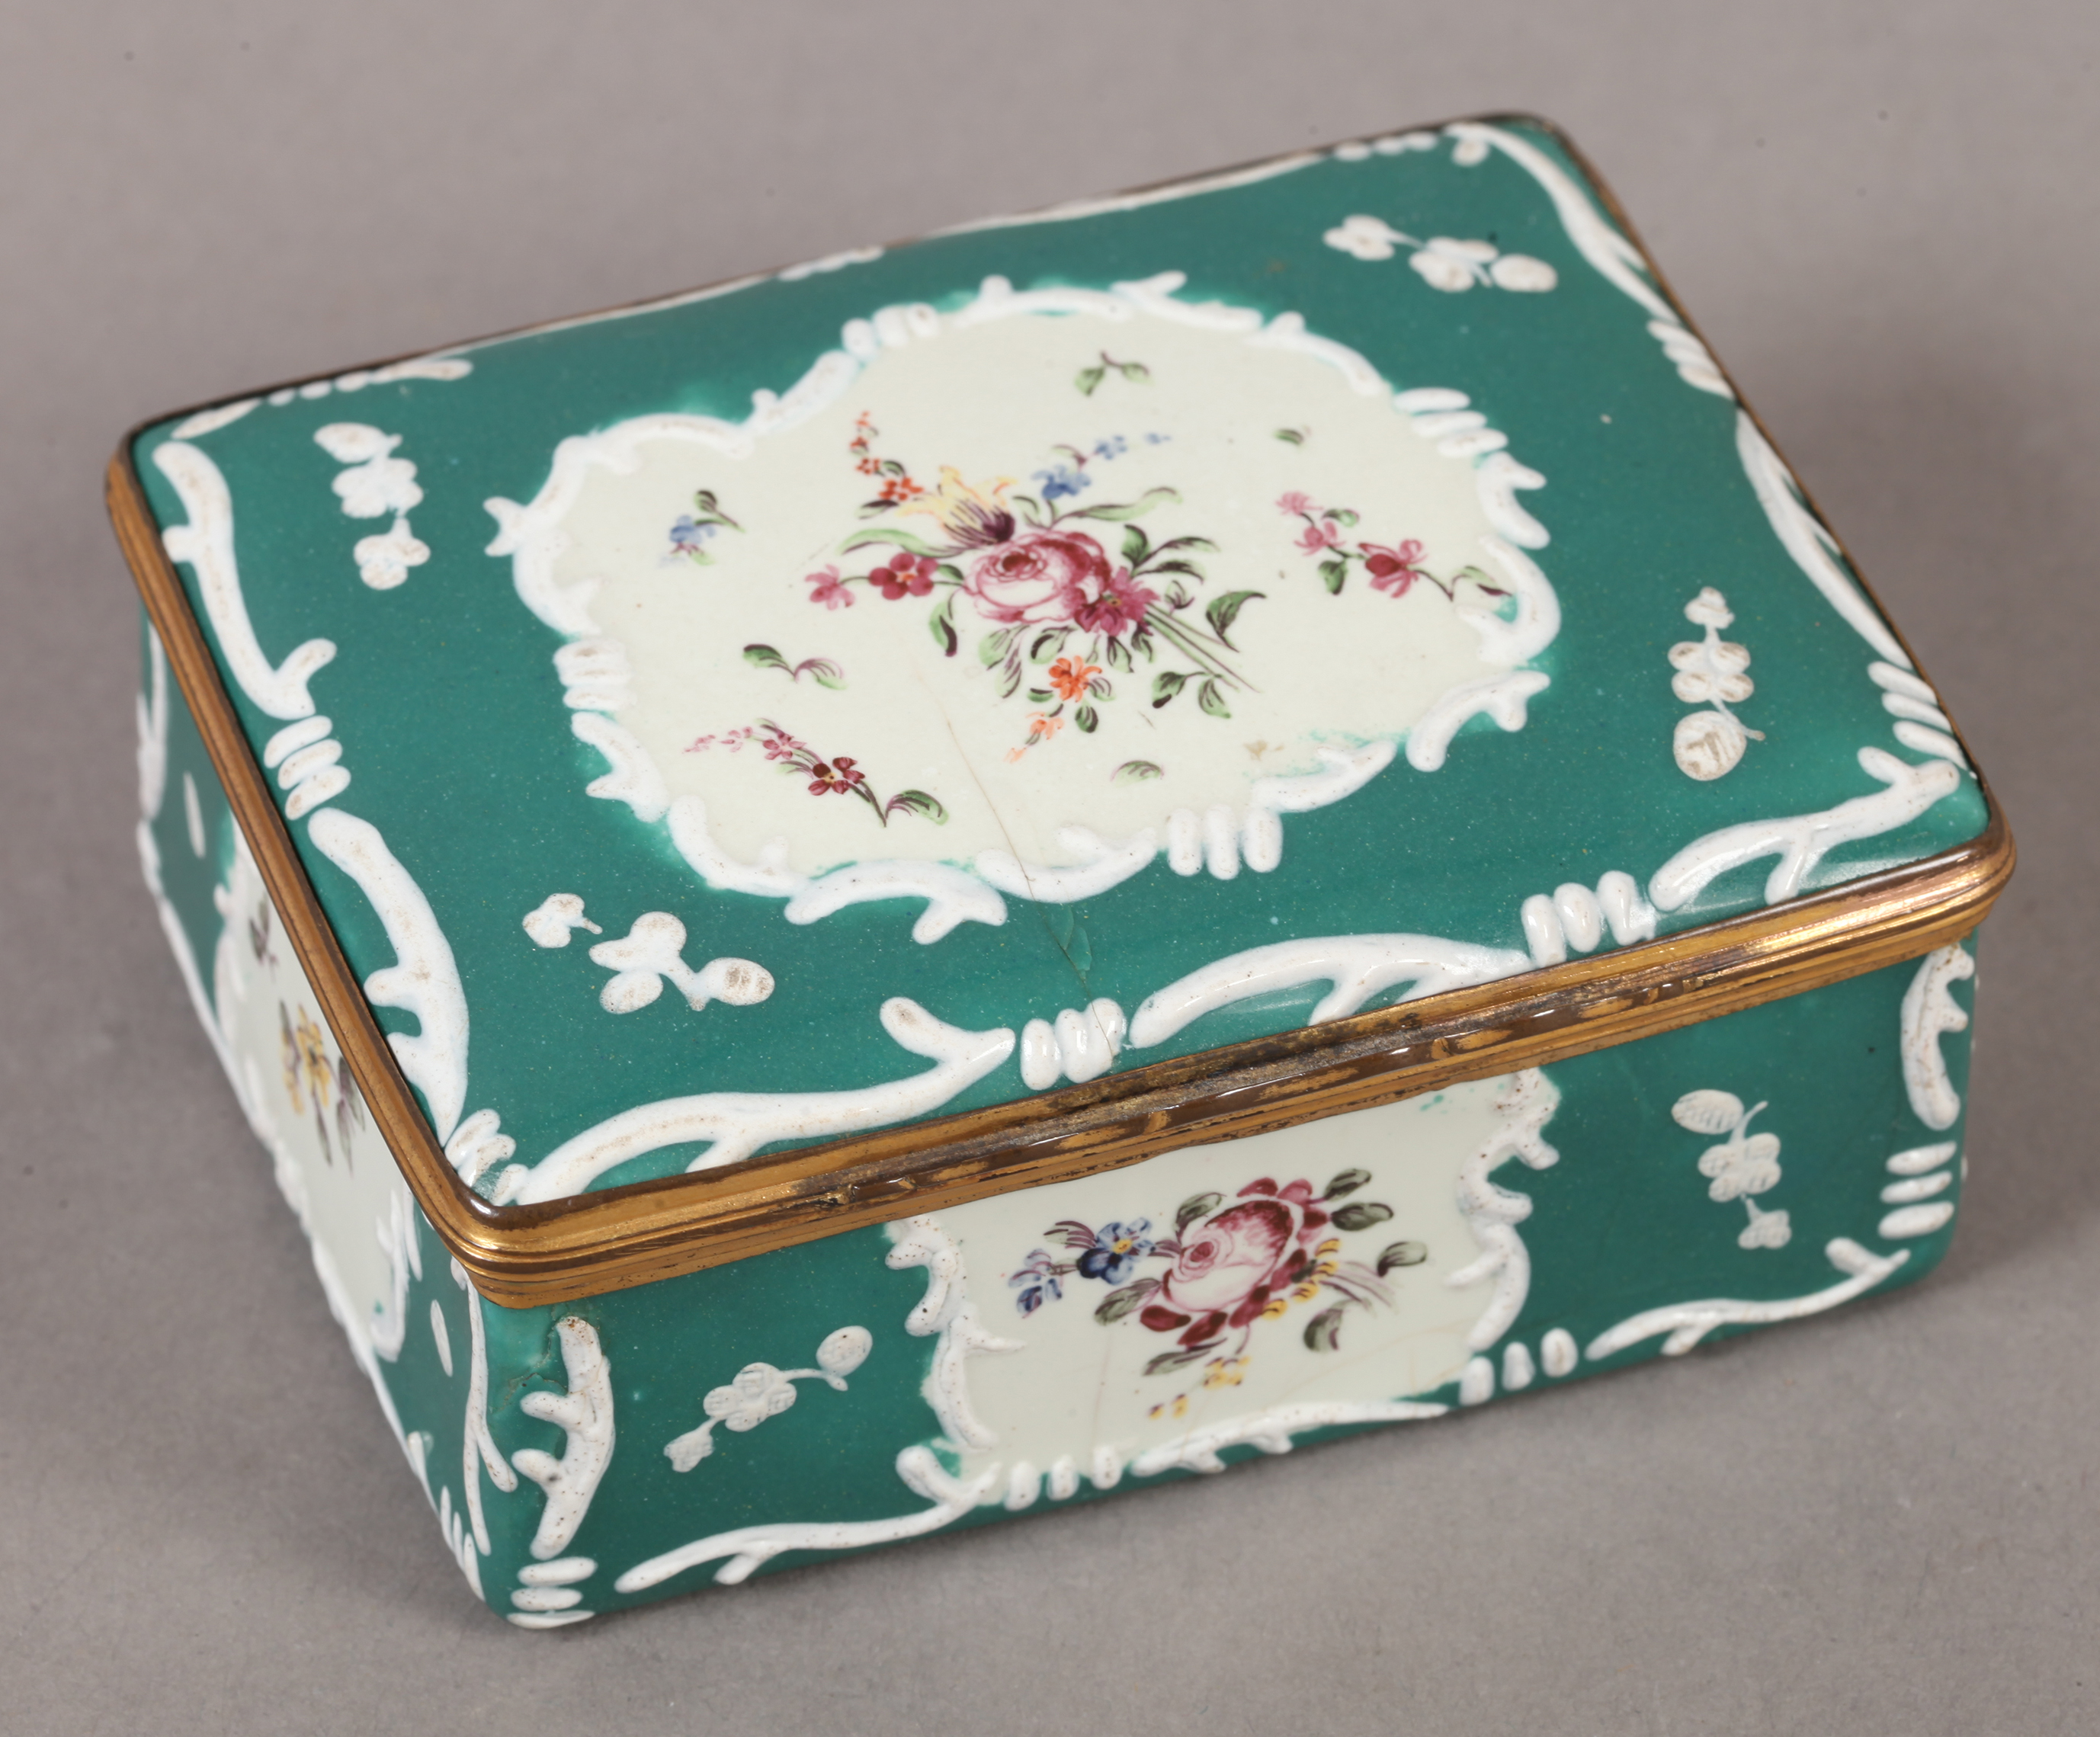 A 19TH CENTURY GERMAN ENAMEL BOX, rectangular, the cover and sides painted with delicate floral - Image 2 of 4